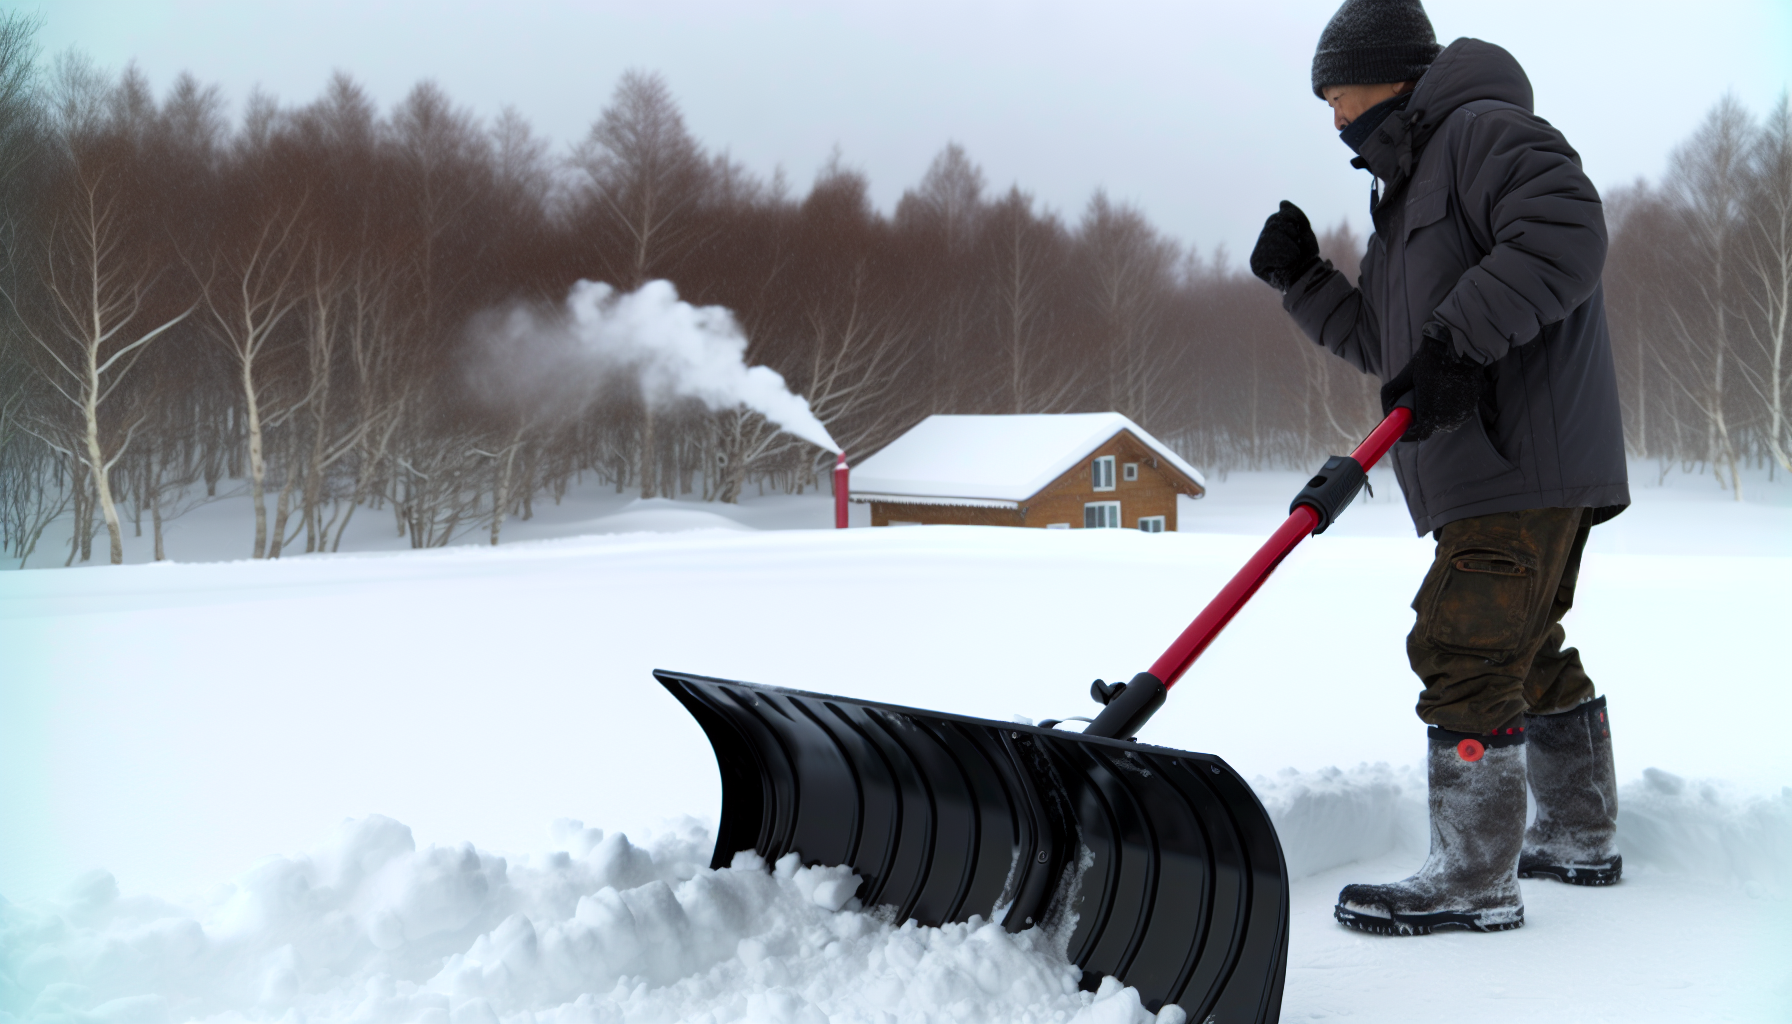 A heavy-duty commercial snow shovel in action